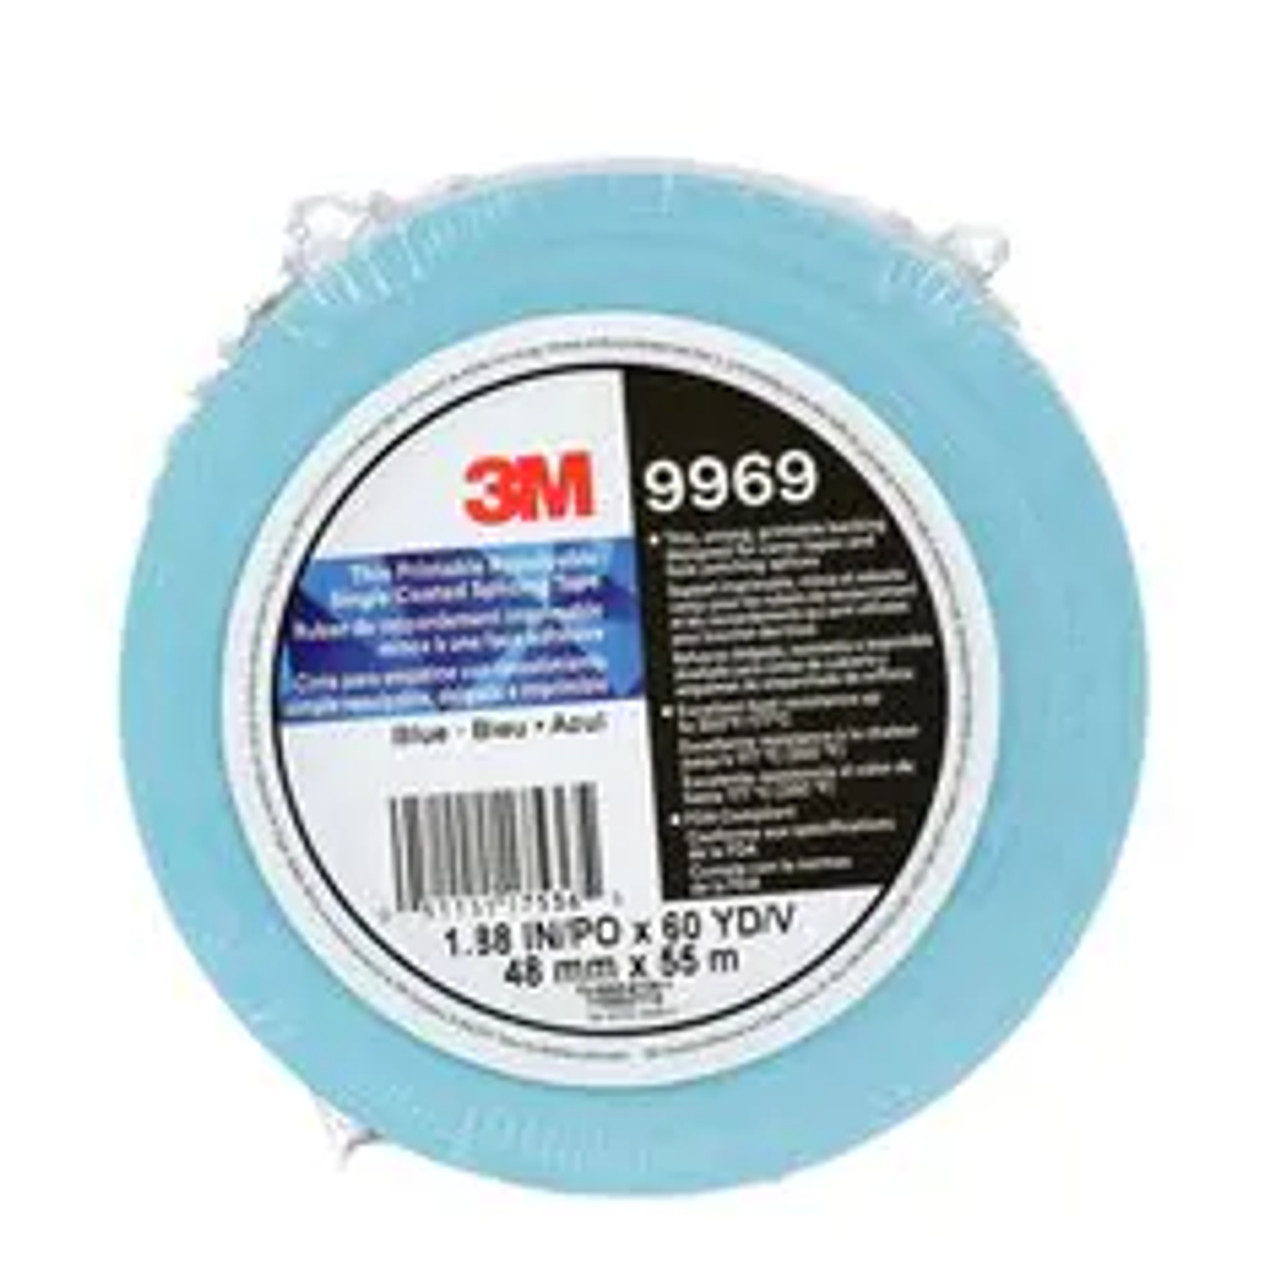 Thin Printable Repulpable Single Coated Splicing Tape 9969B